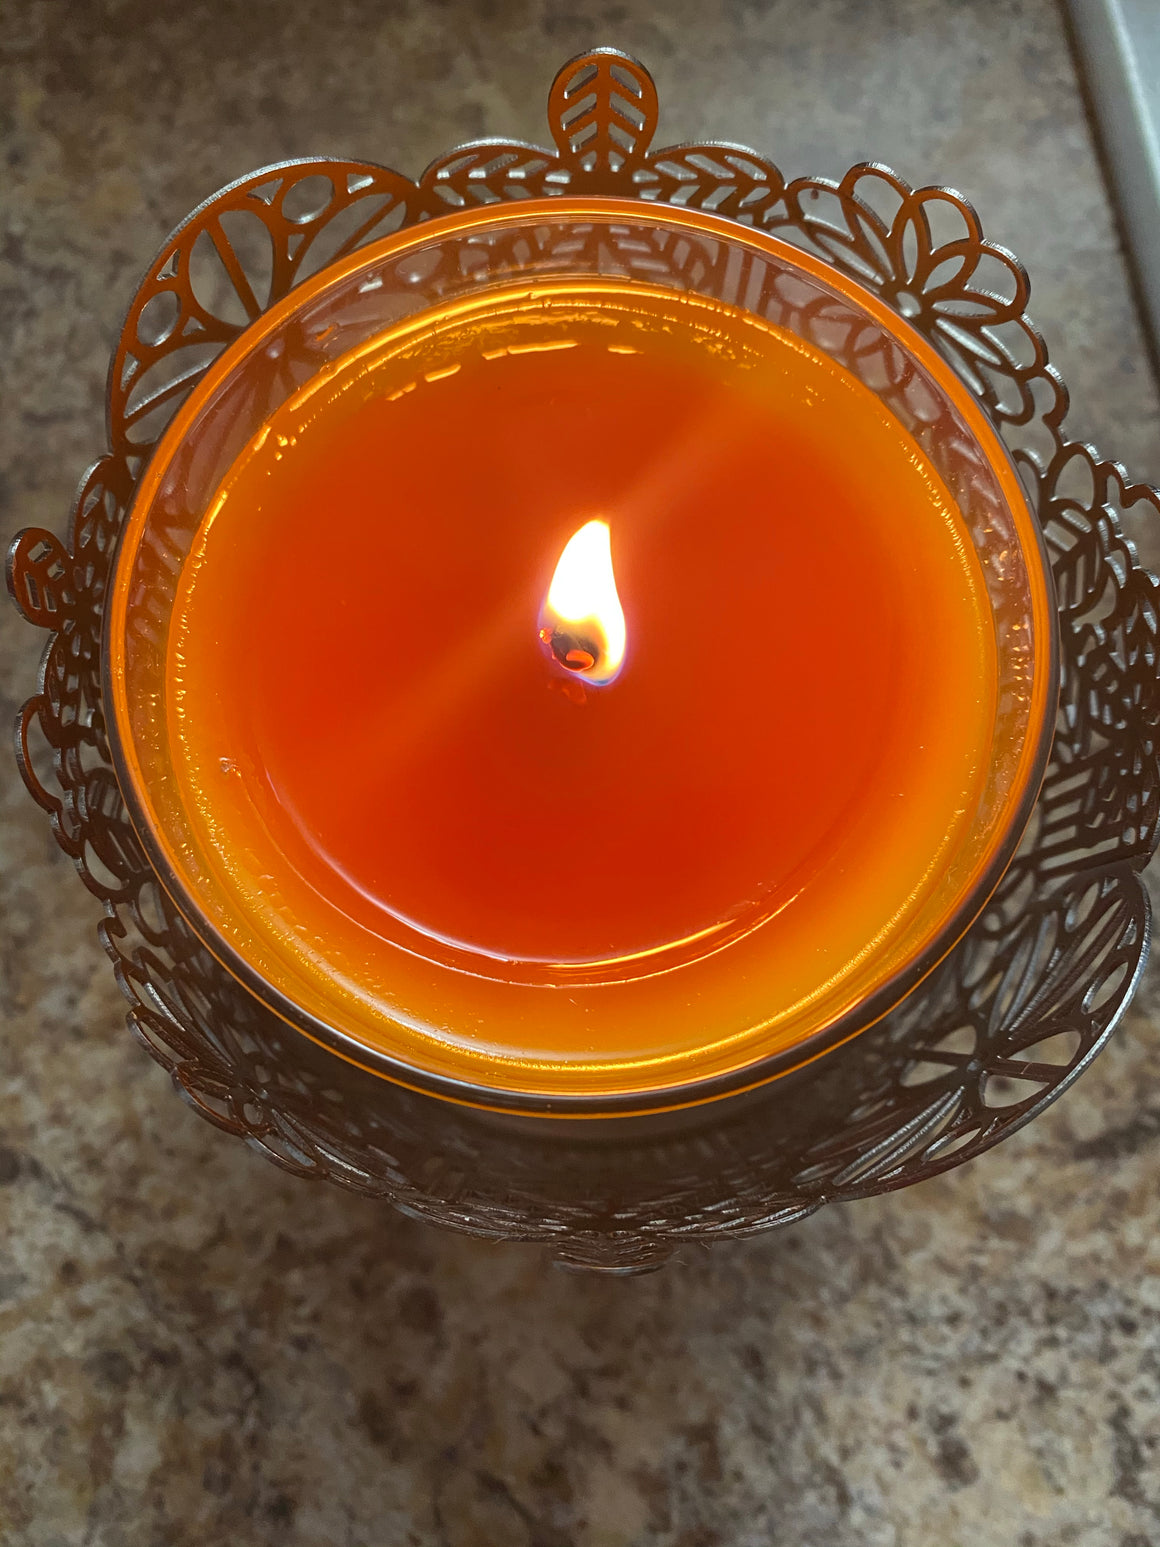 Glass Peach scented candle lit.